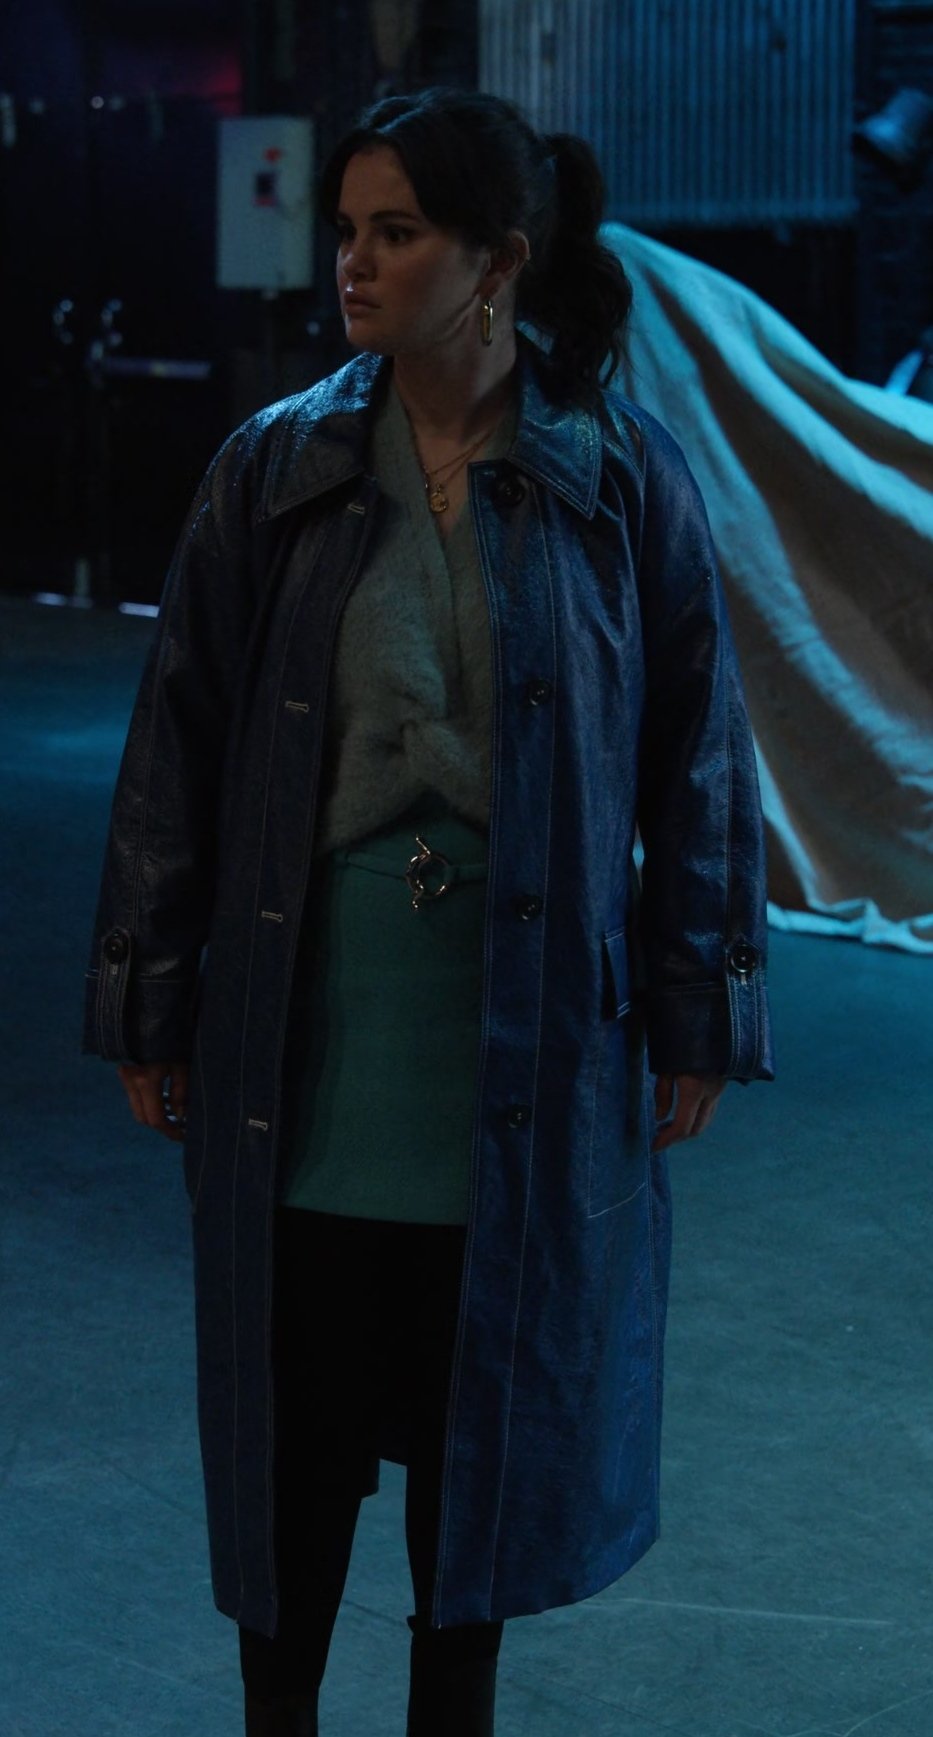 Worn on Only Murders in the Building TV Show - Blue Distressed Faux Leather Trench Coat of Selena Gomez as Mabel Mora